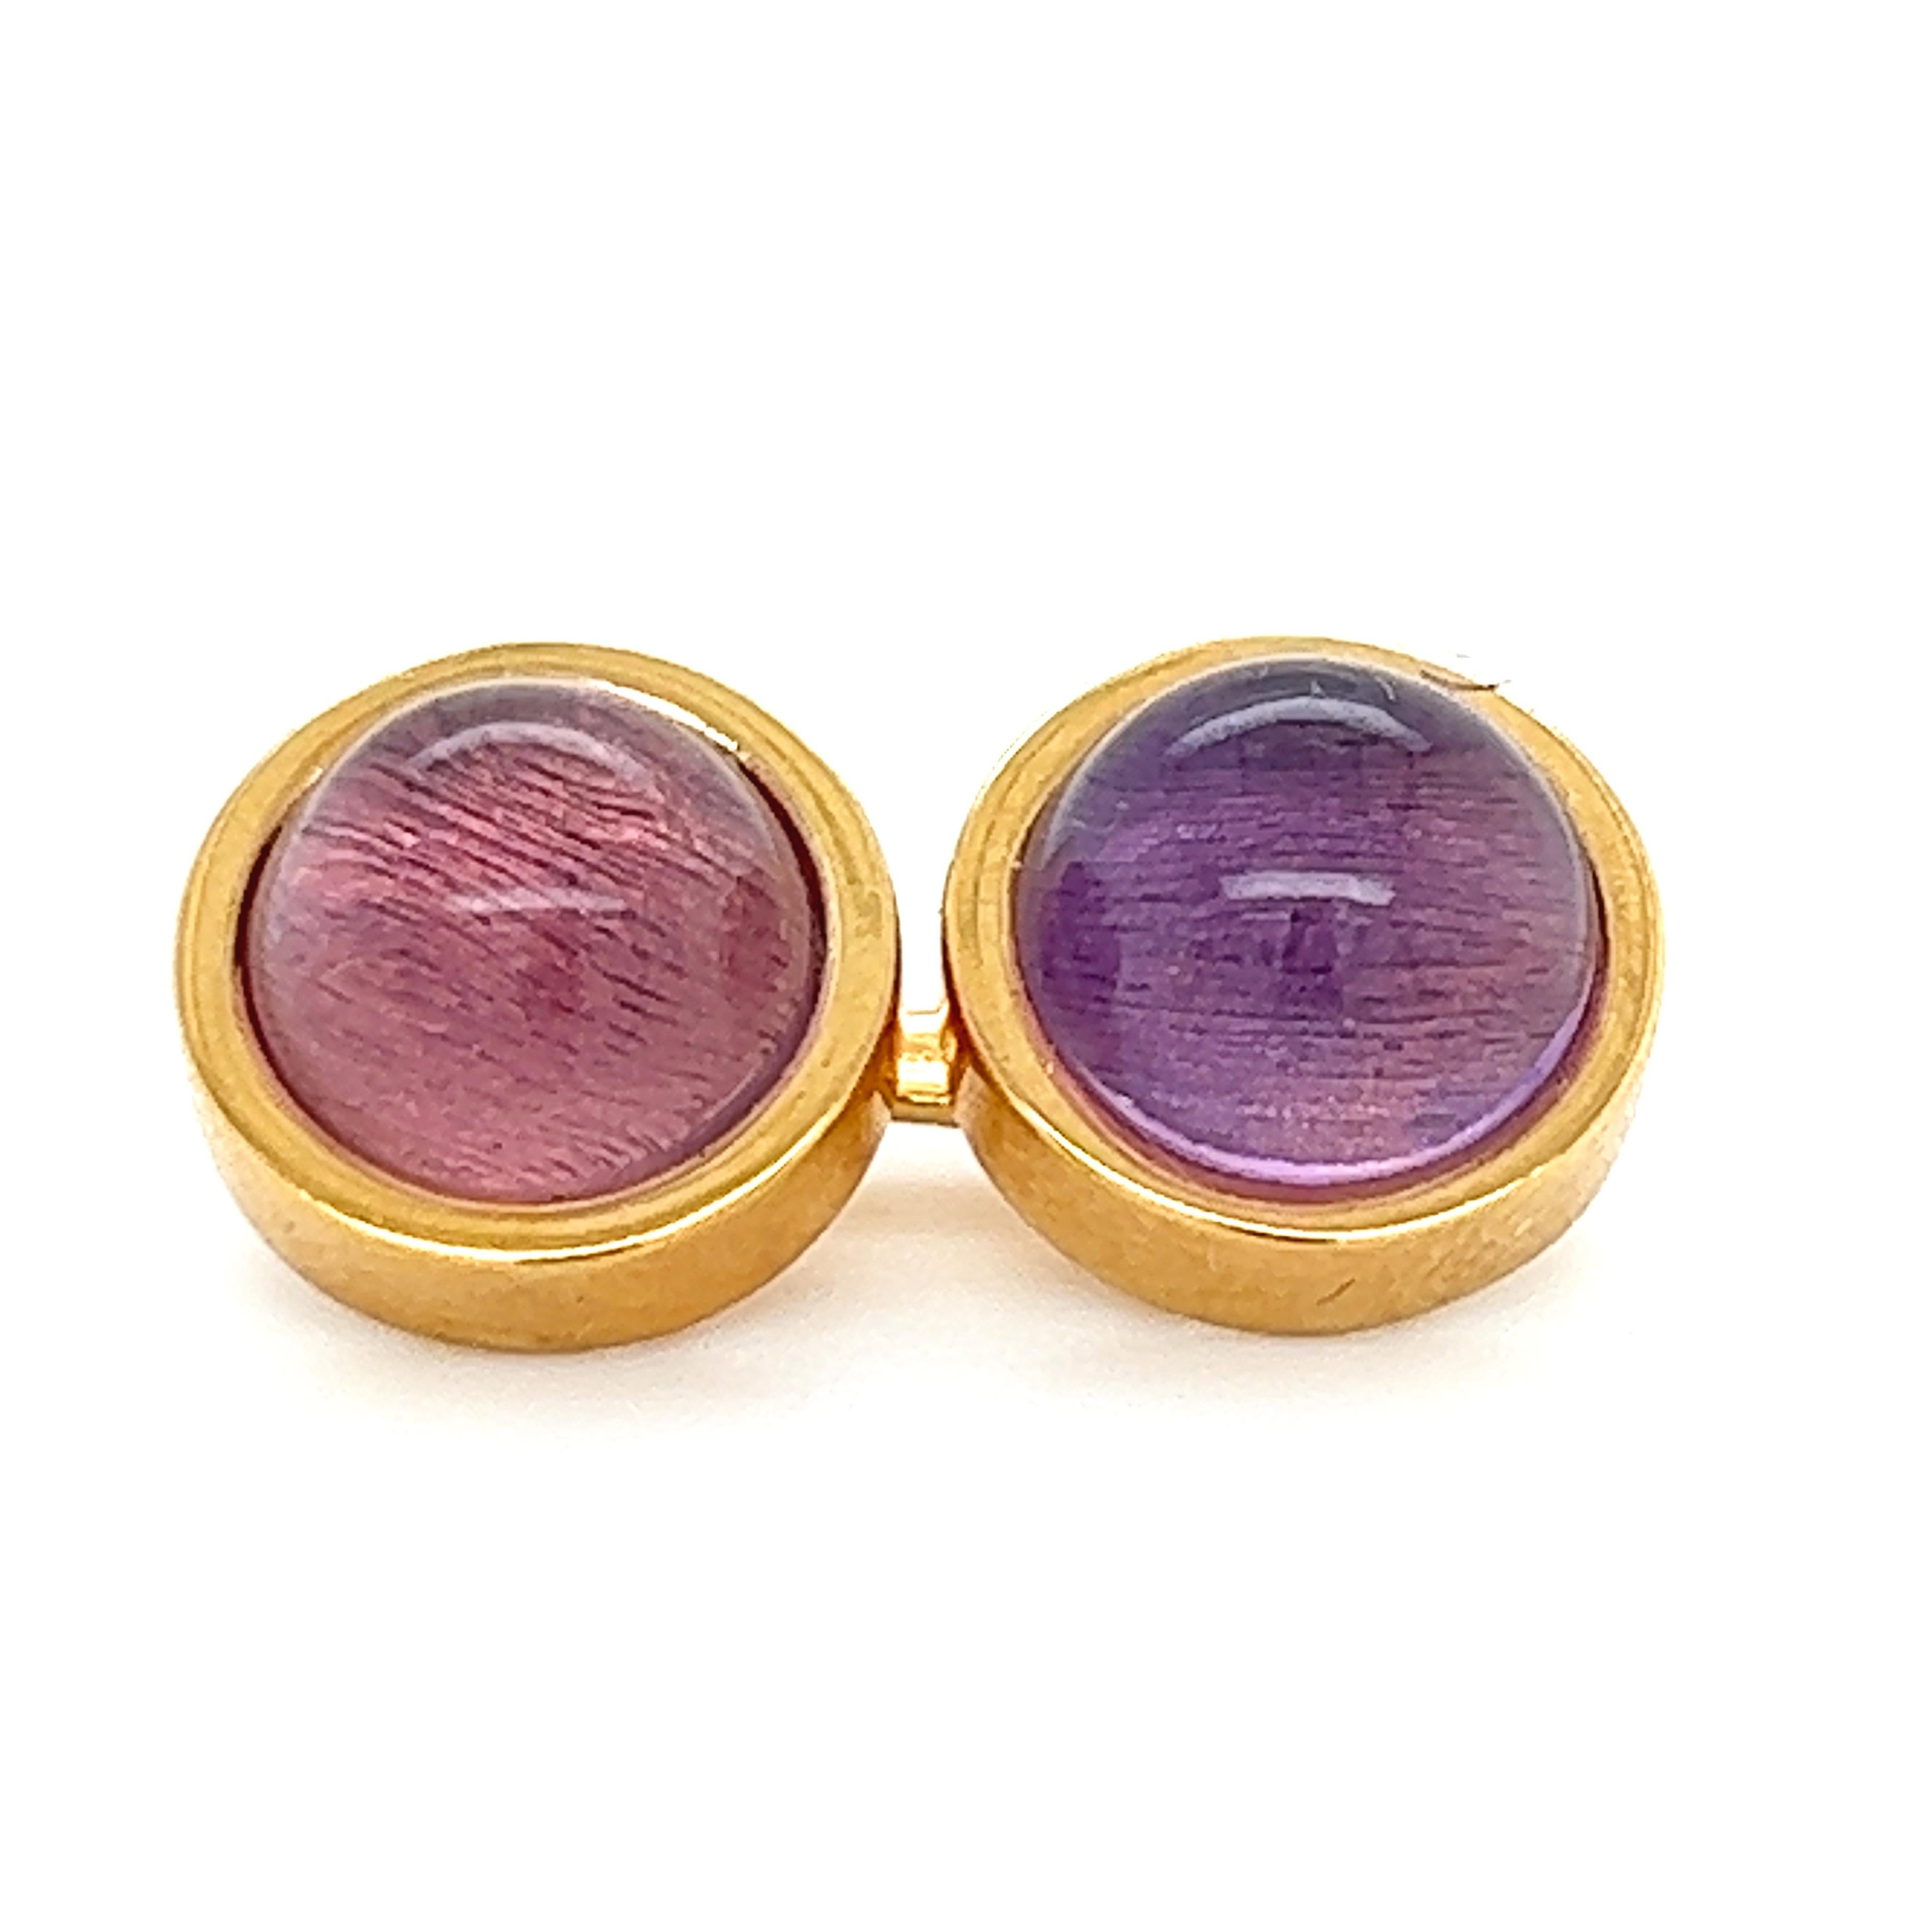 Chic and Timeless, Natural Hand Inlaid Amethyst Cabochon Round Shaped Sterling Silver Gold Plated Cufflinks.
In our smart fitted Tobacco Suede Leather Case and Pouch.

